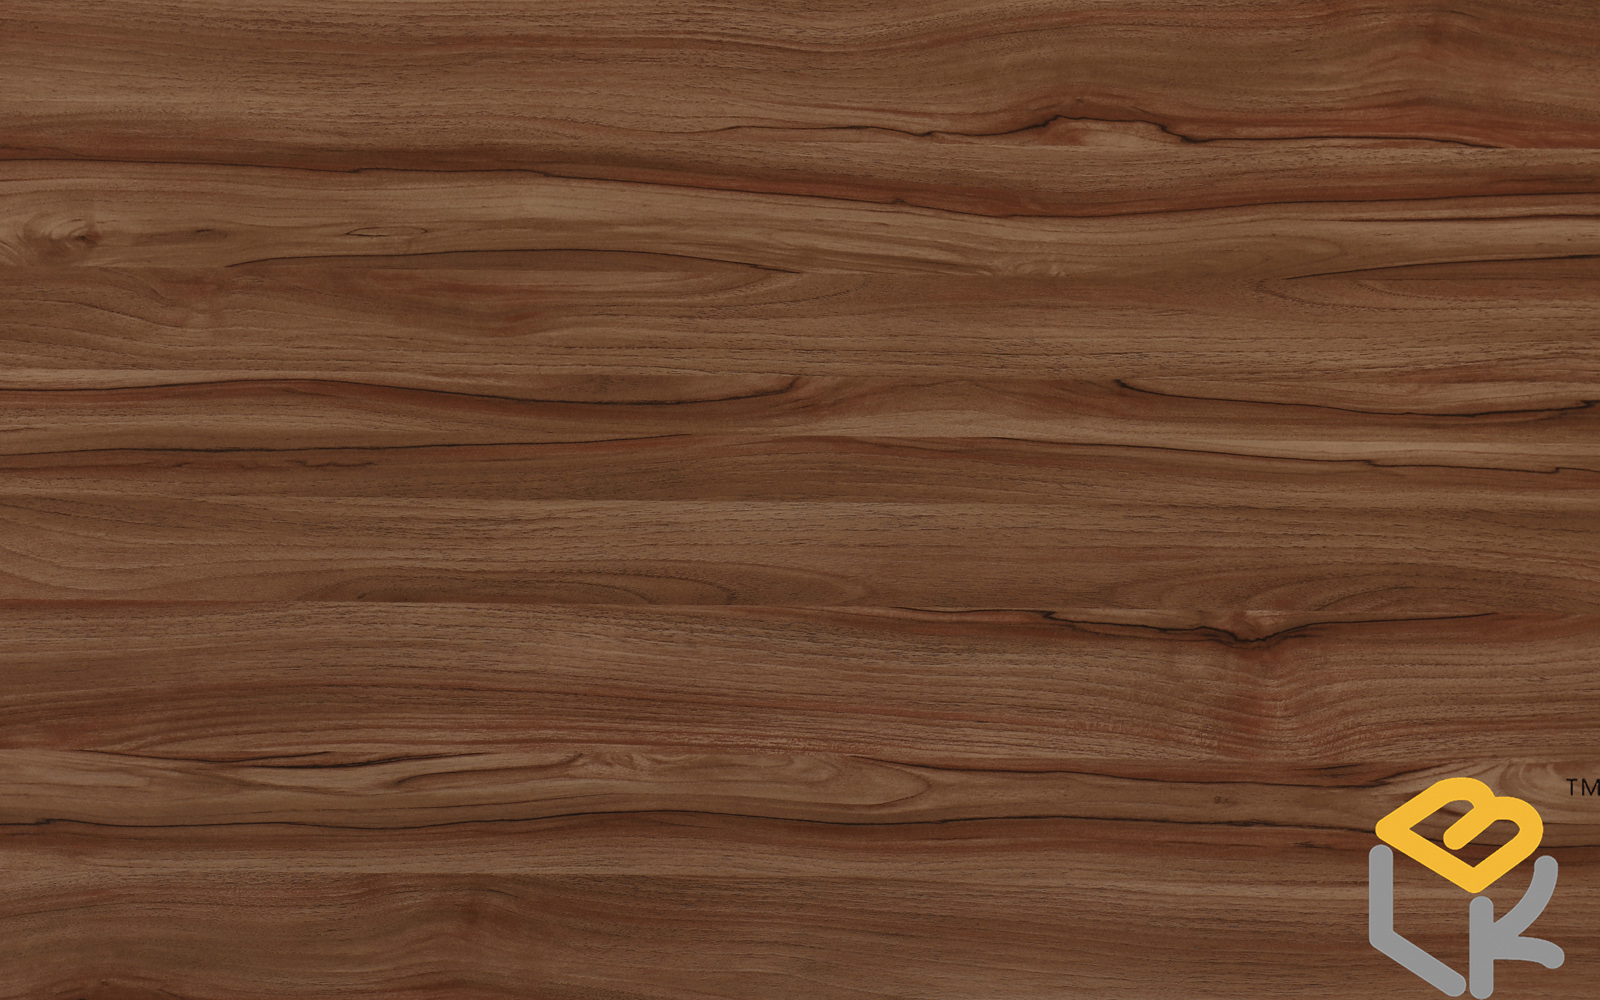 China woodgrain melamine faced MDF from BLK